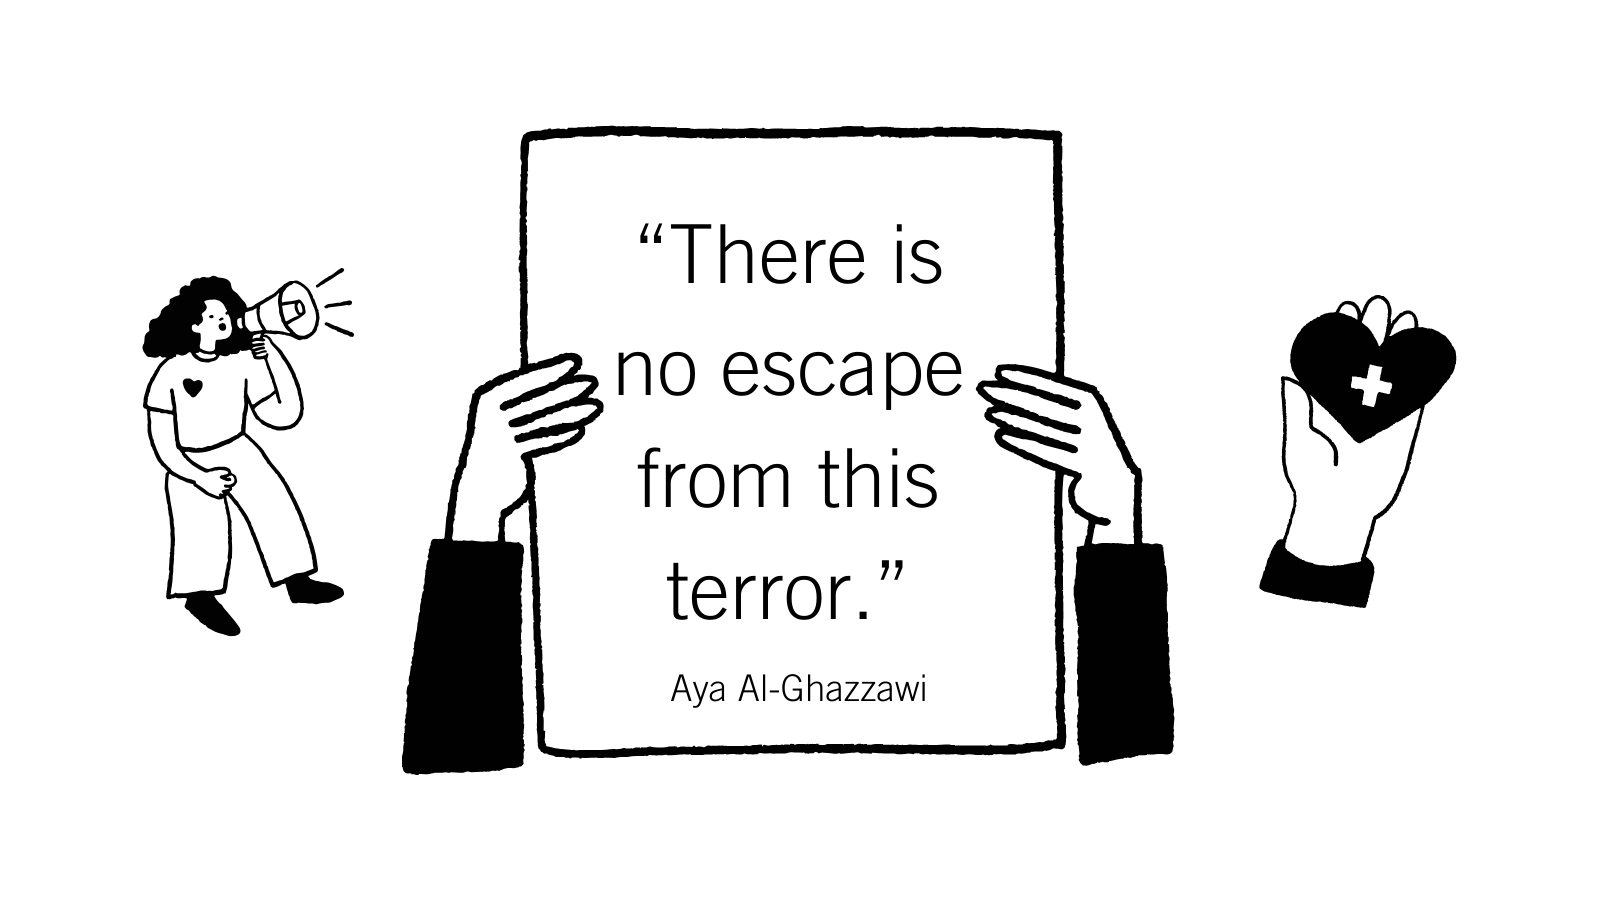 "There is no escape from this terror by Aya Al-Ghazzawi"